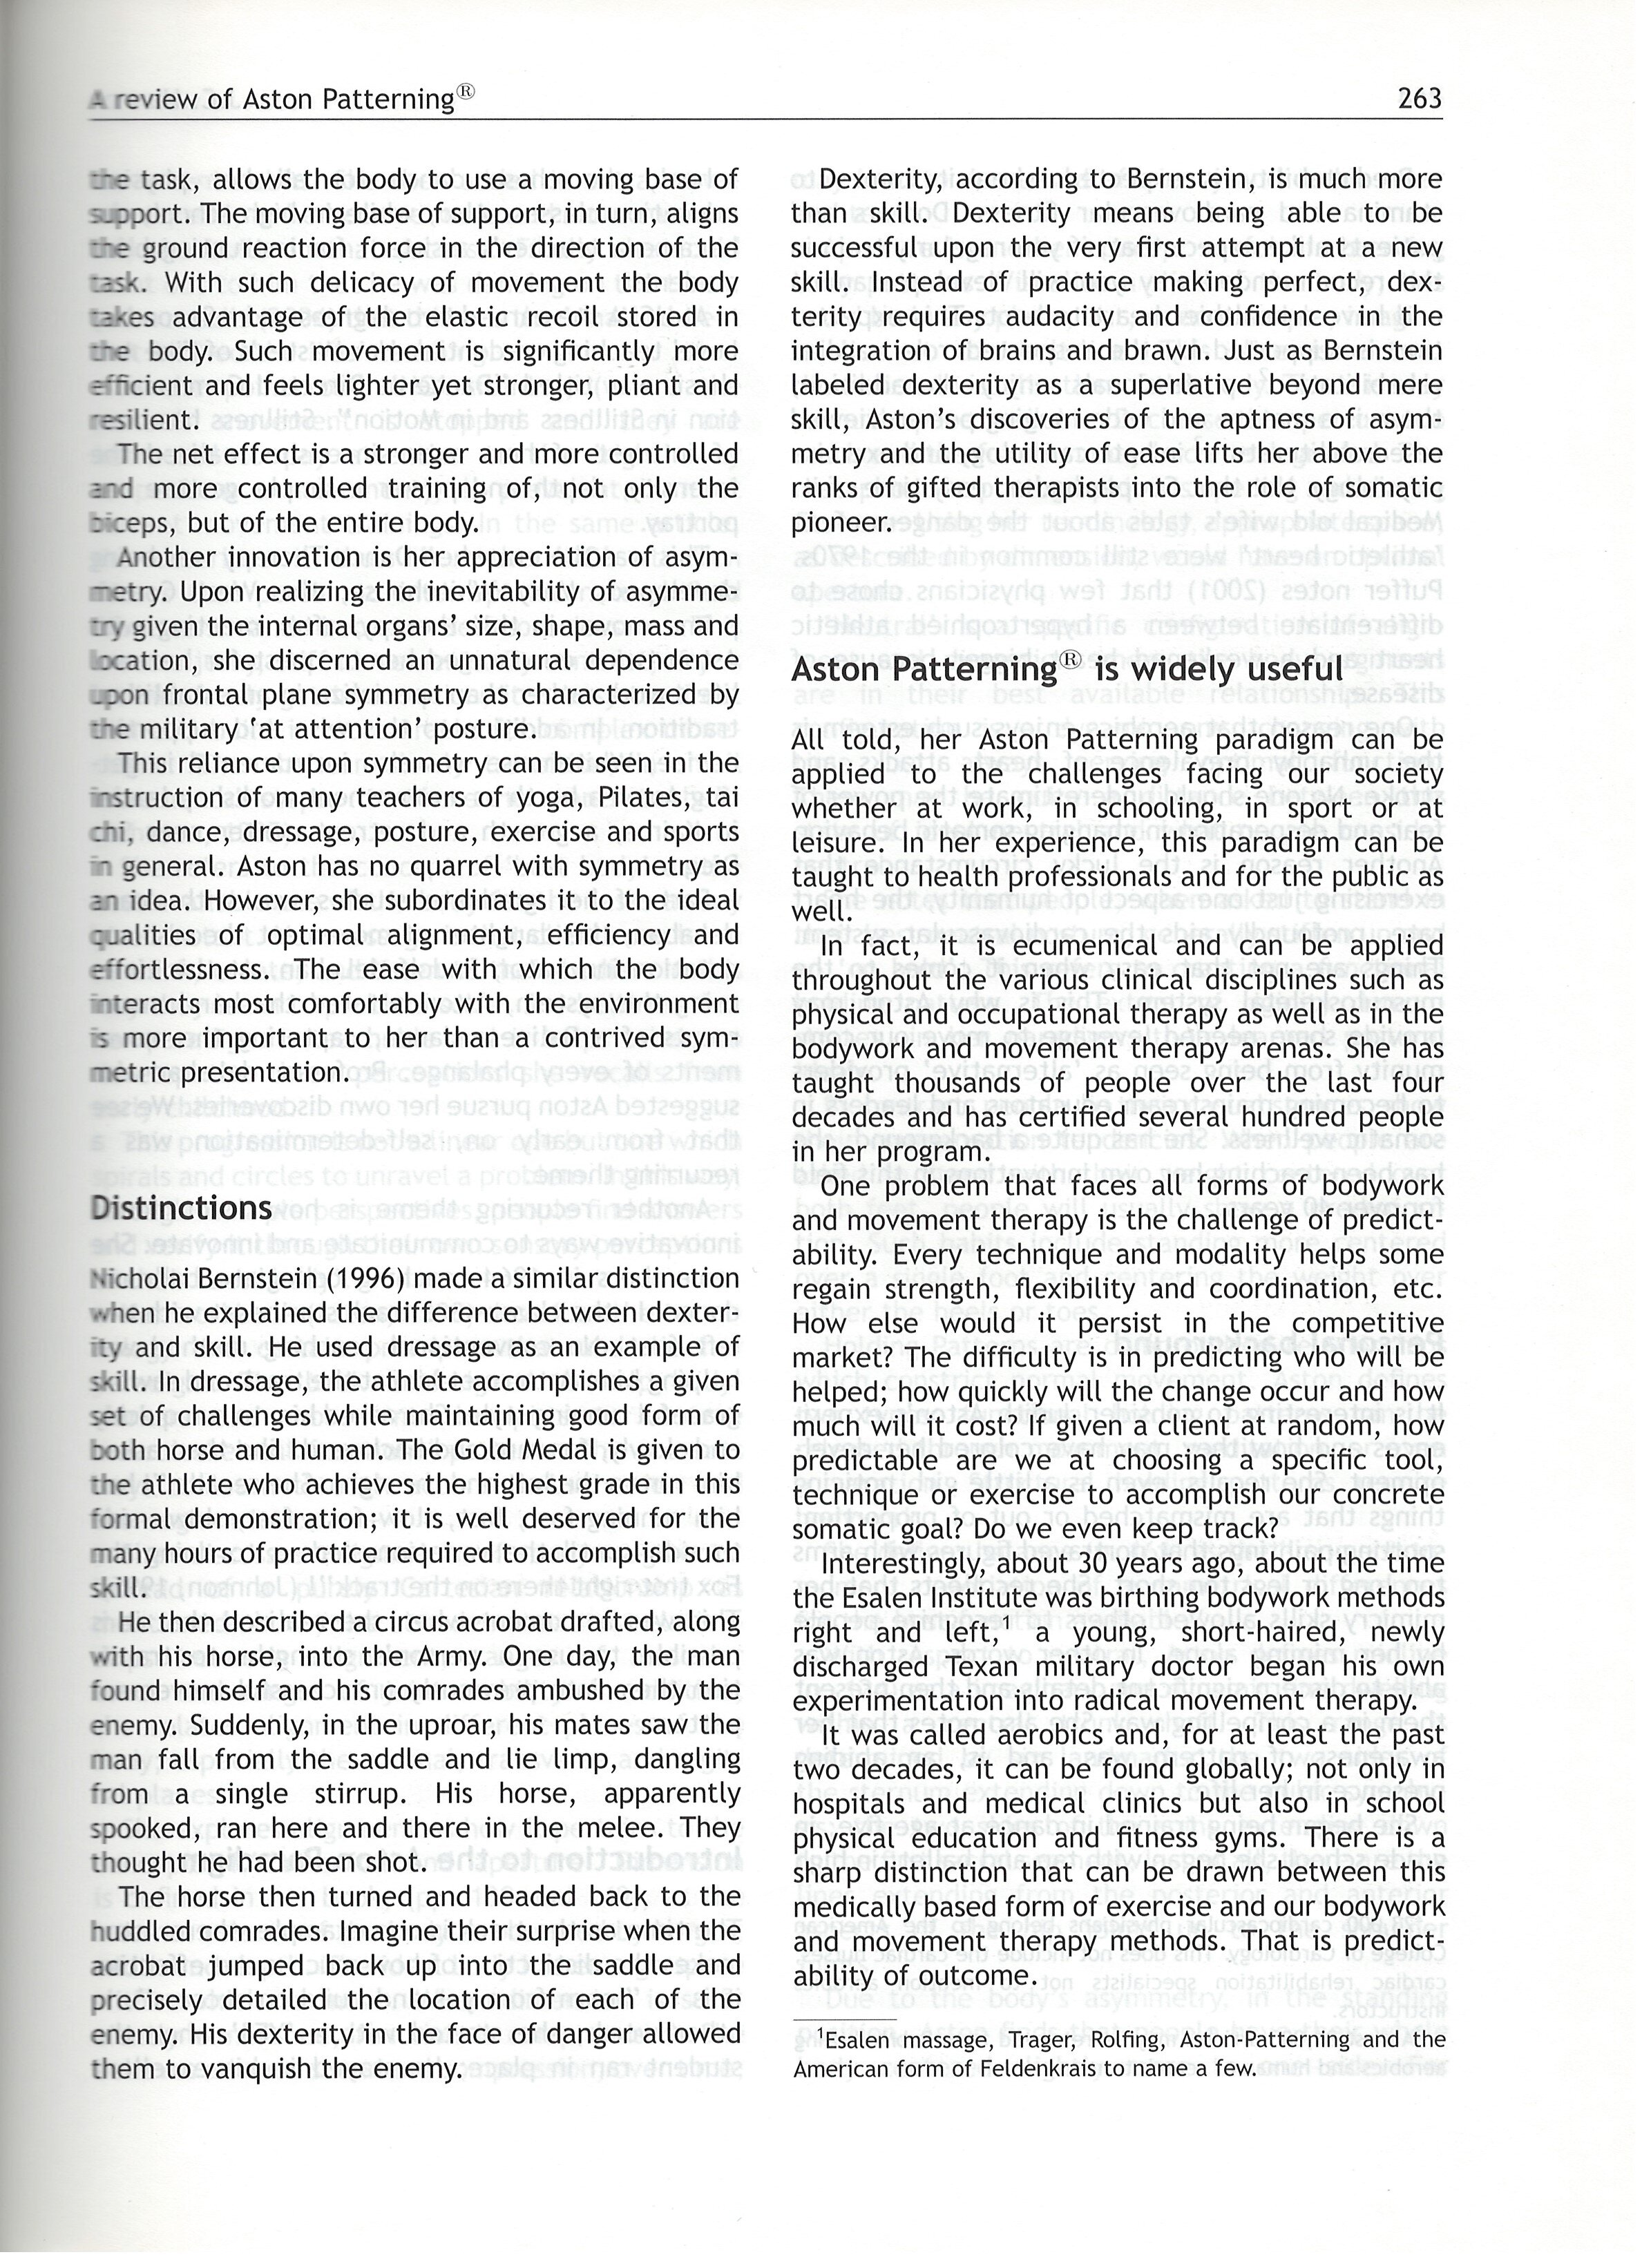 Journal of Bodywork and Movement Therapies 2005.4.jpg